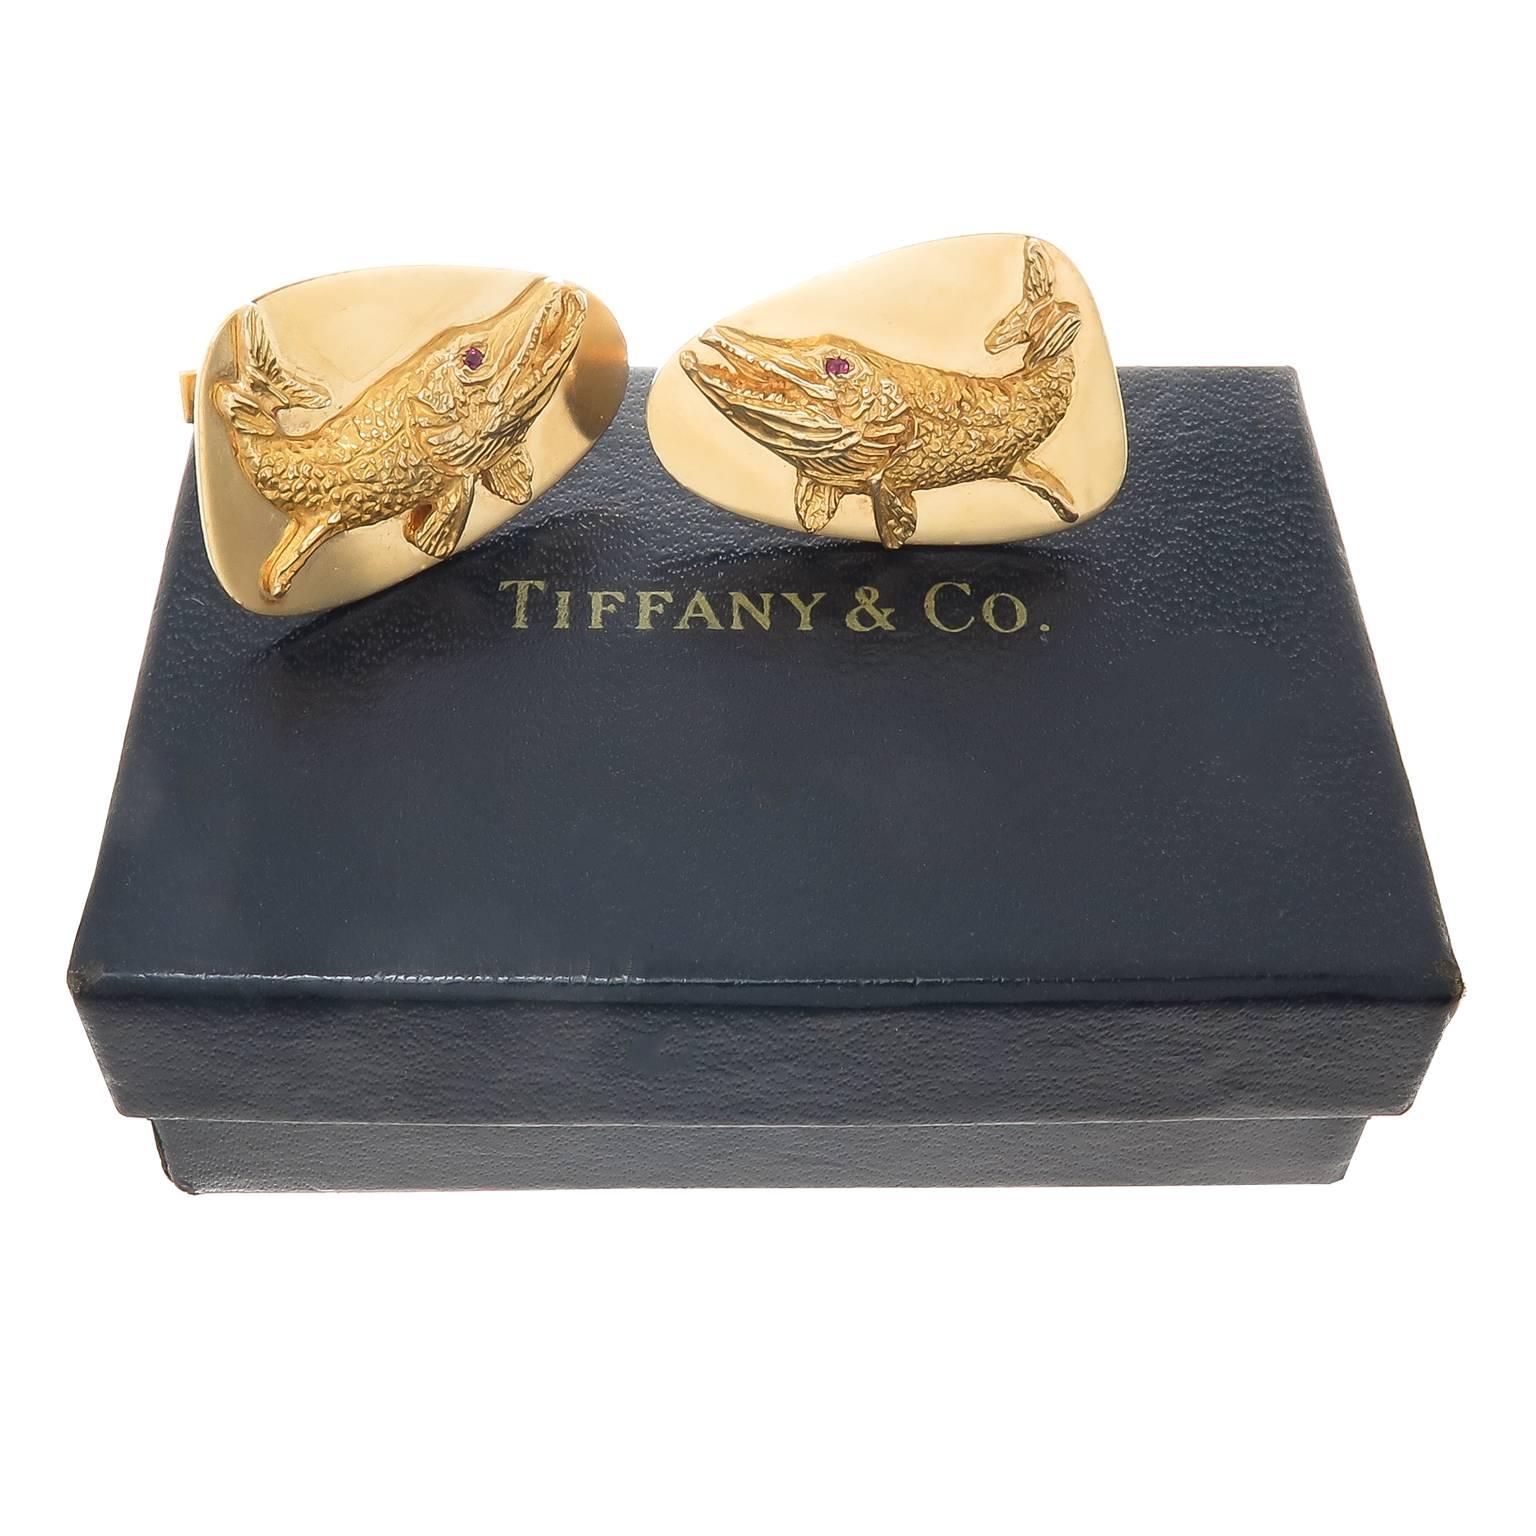 Men's Tiffany & Co. Large Ruby Gold Fish Cuff Links